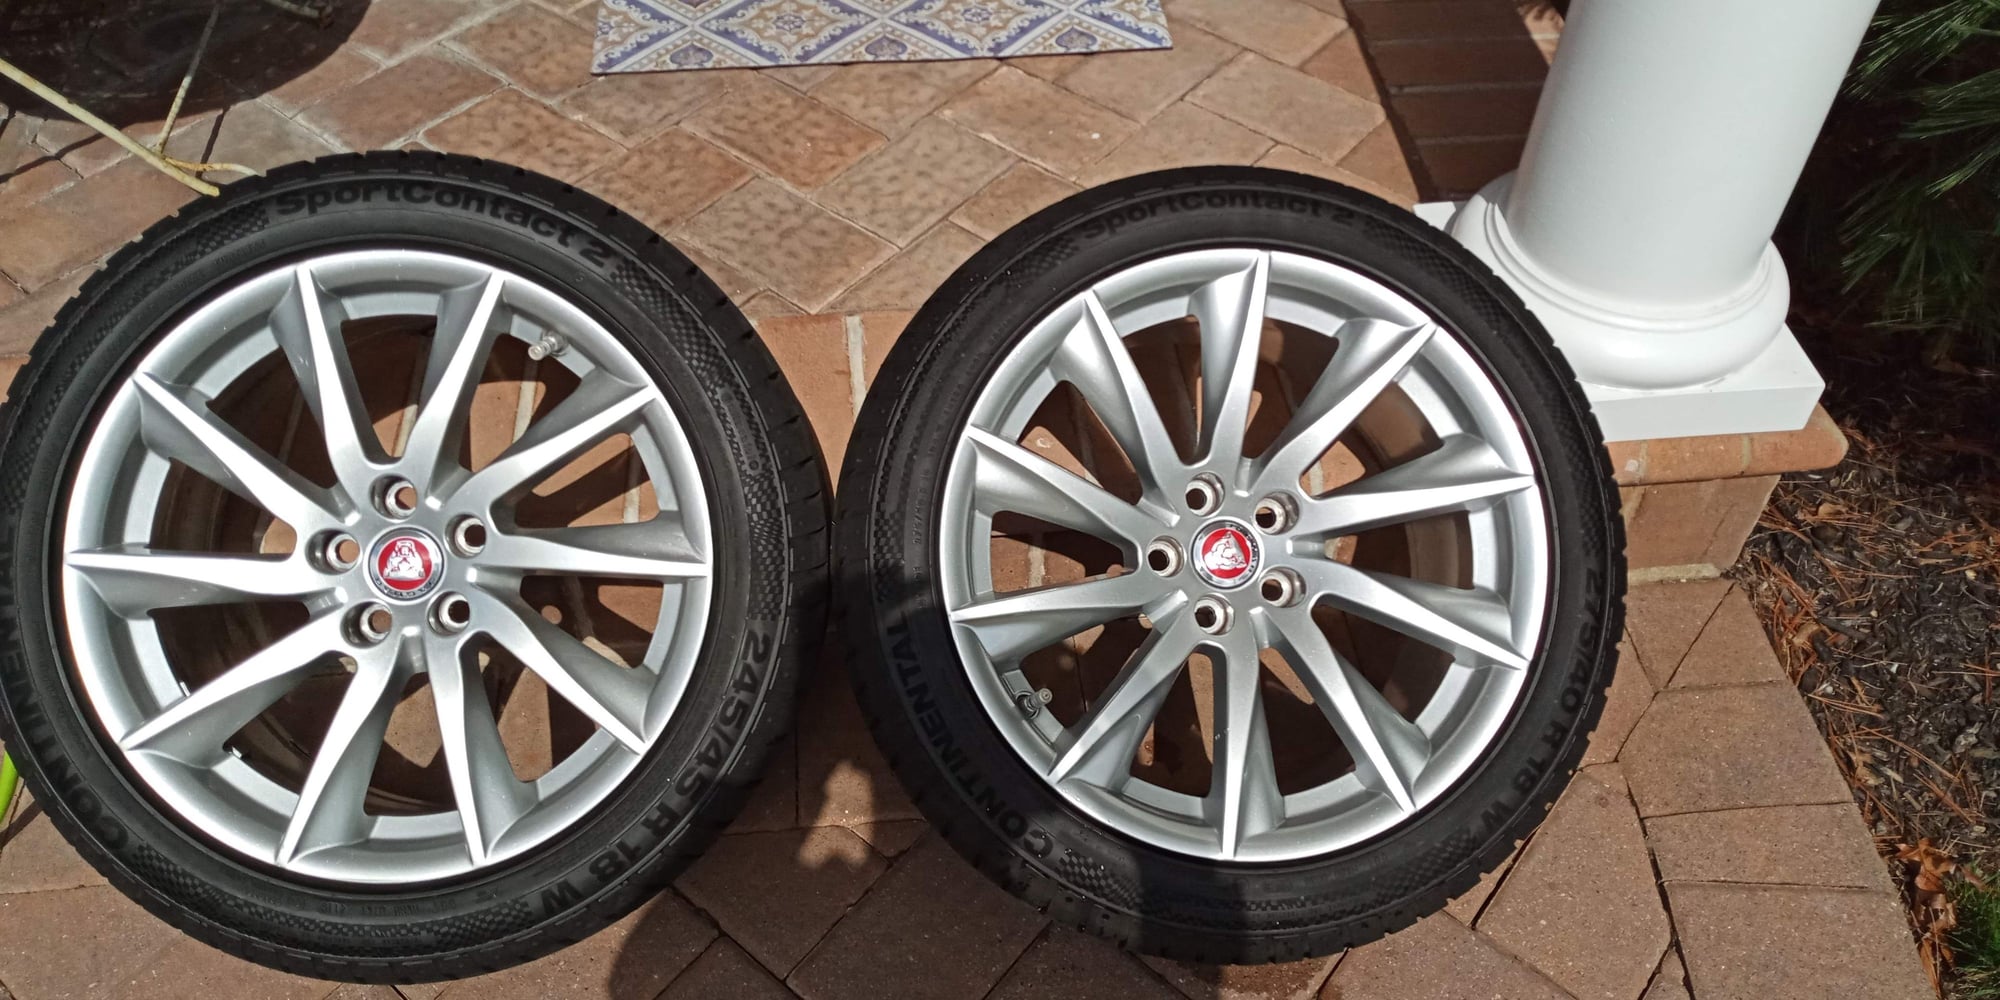 Wheels and Tires/Axles - Like New, staggered 18" Turbine factory rims and tires. - Used - All Years Jaguar All Models - Deer Park, NY 11729, United States